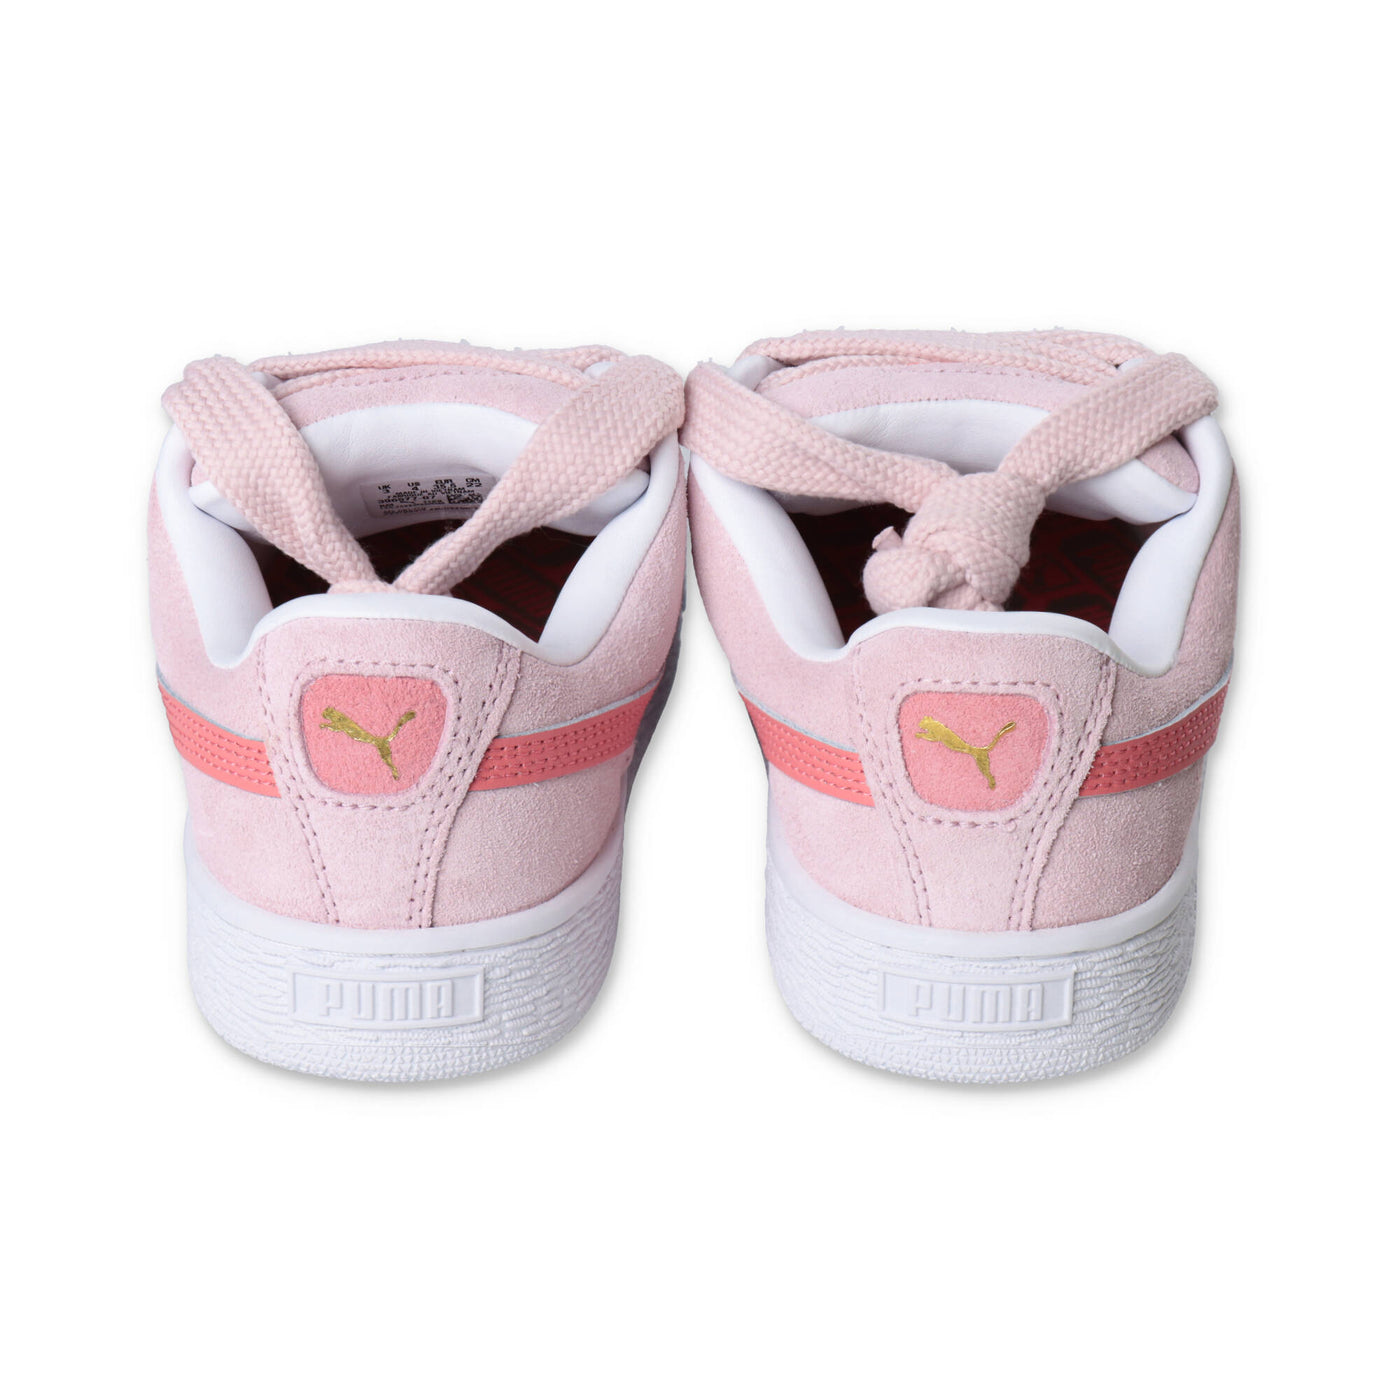 Pink suede leather girl PUMA sneakers